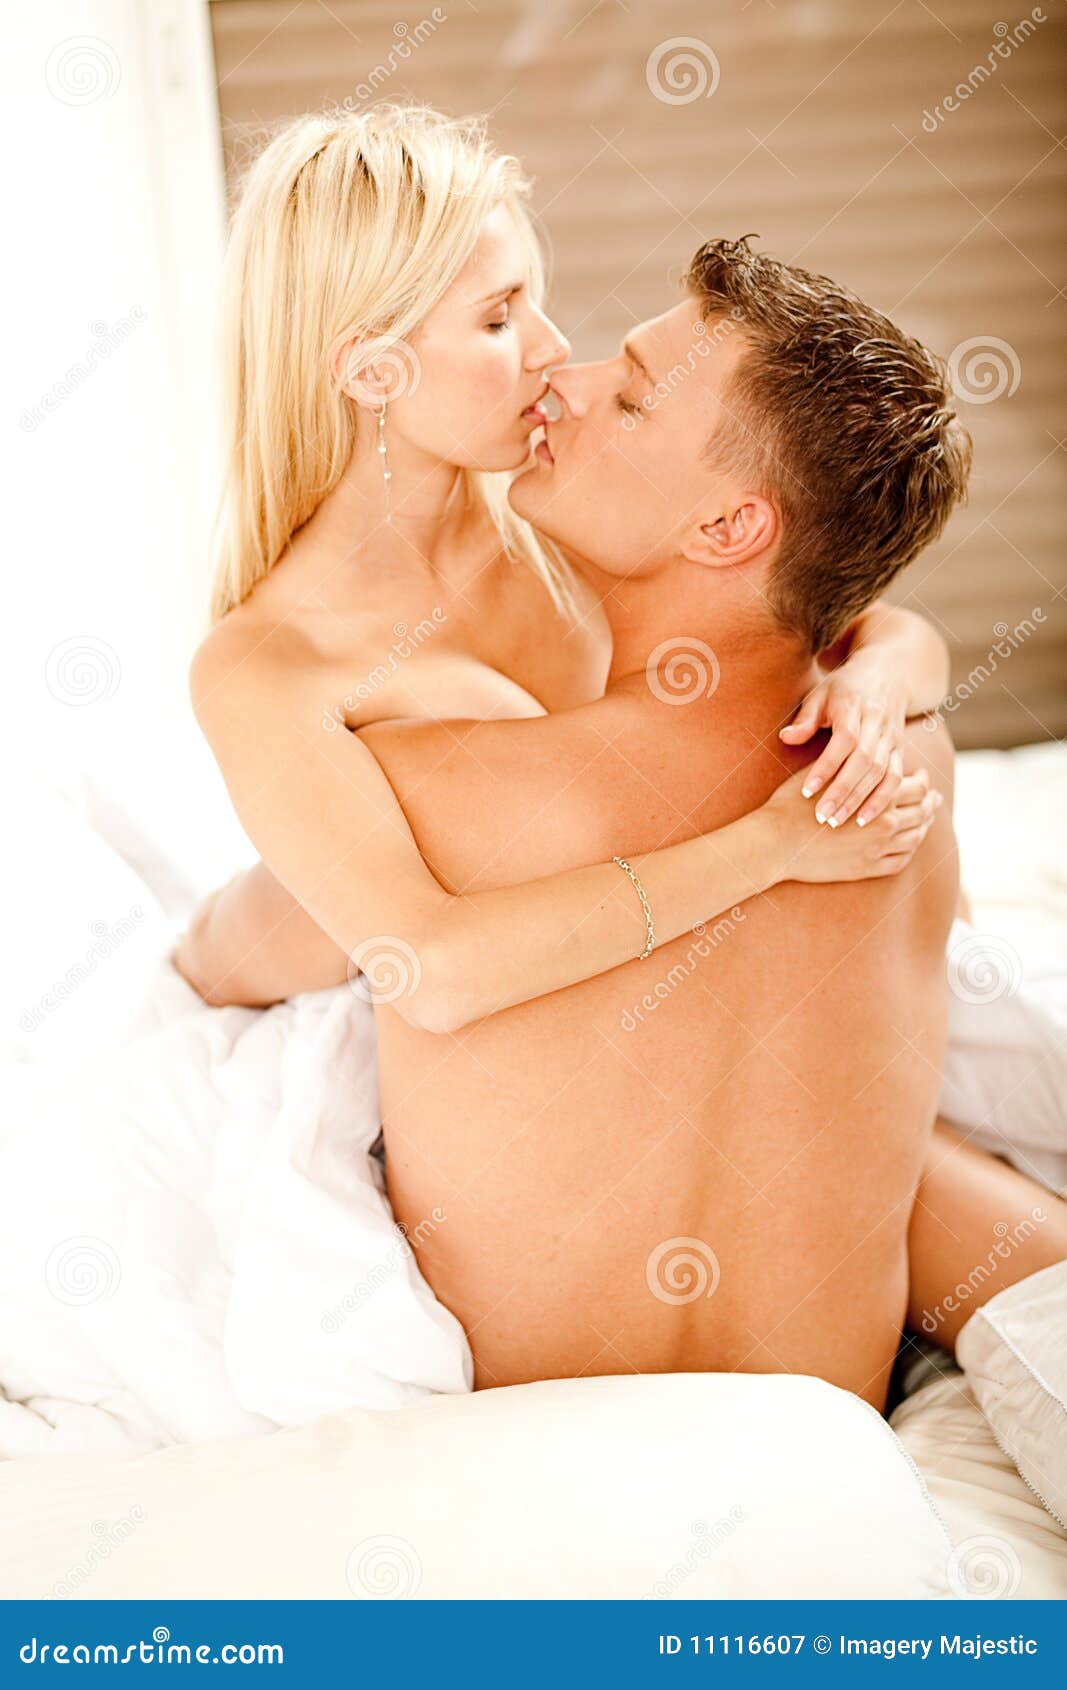 Best of Married couple sex pics